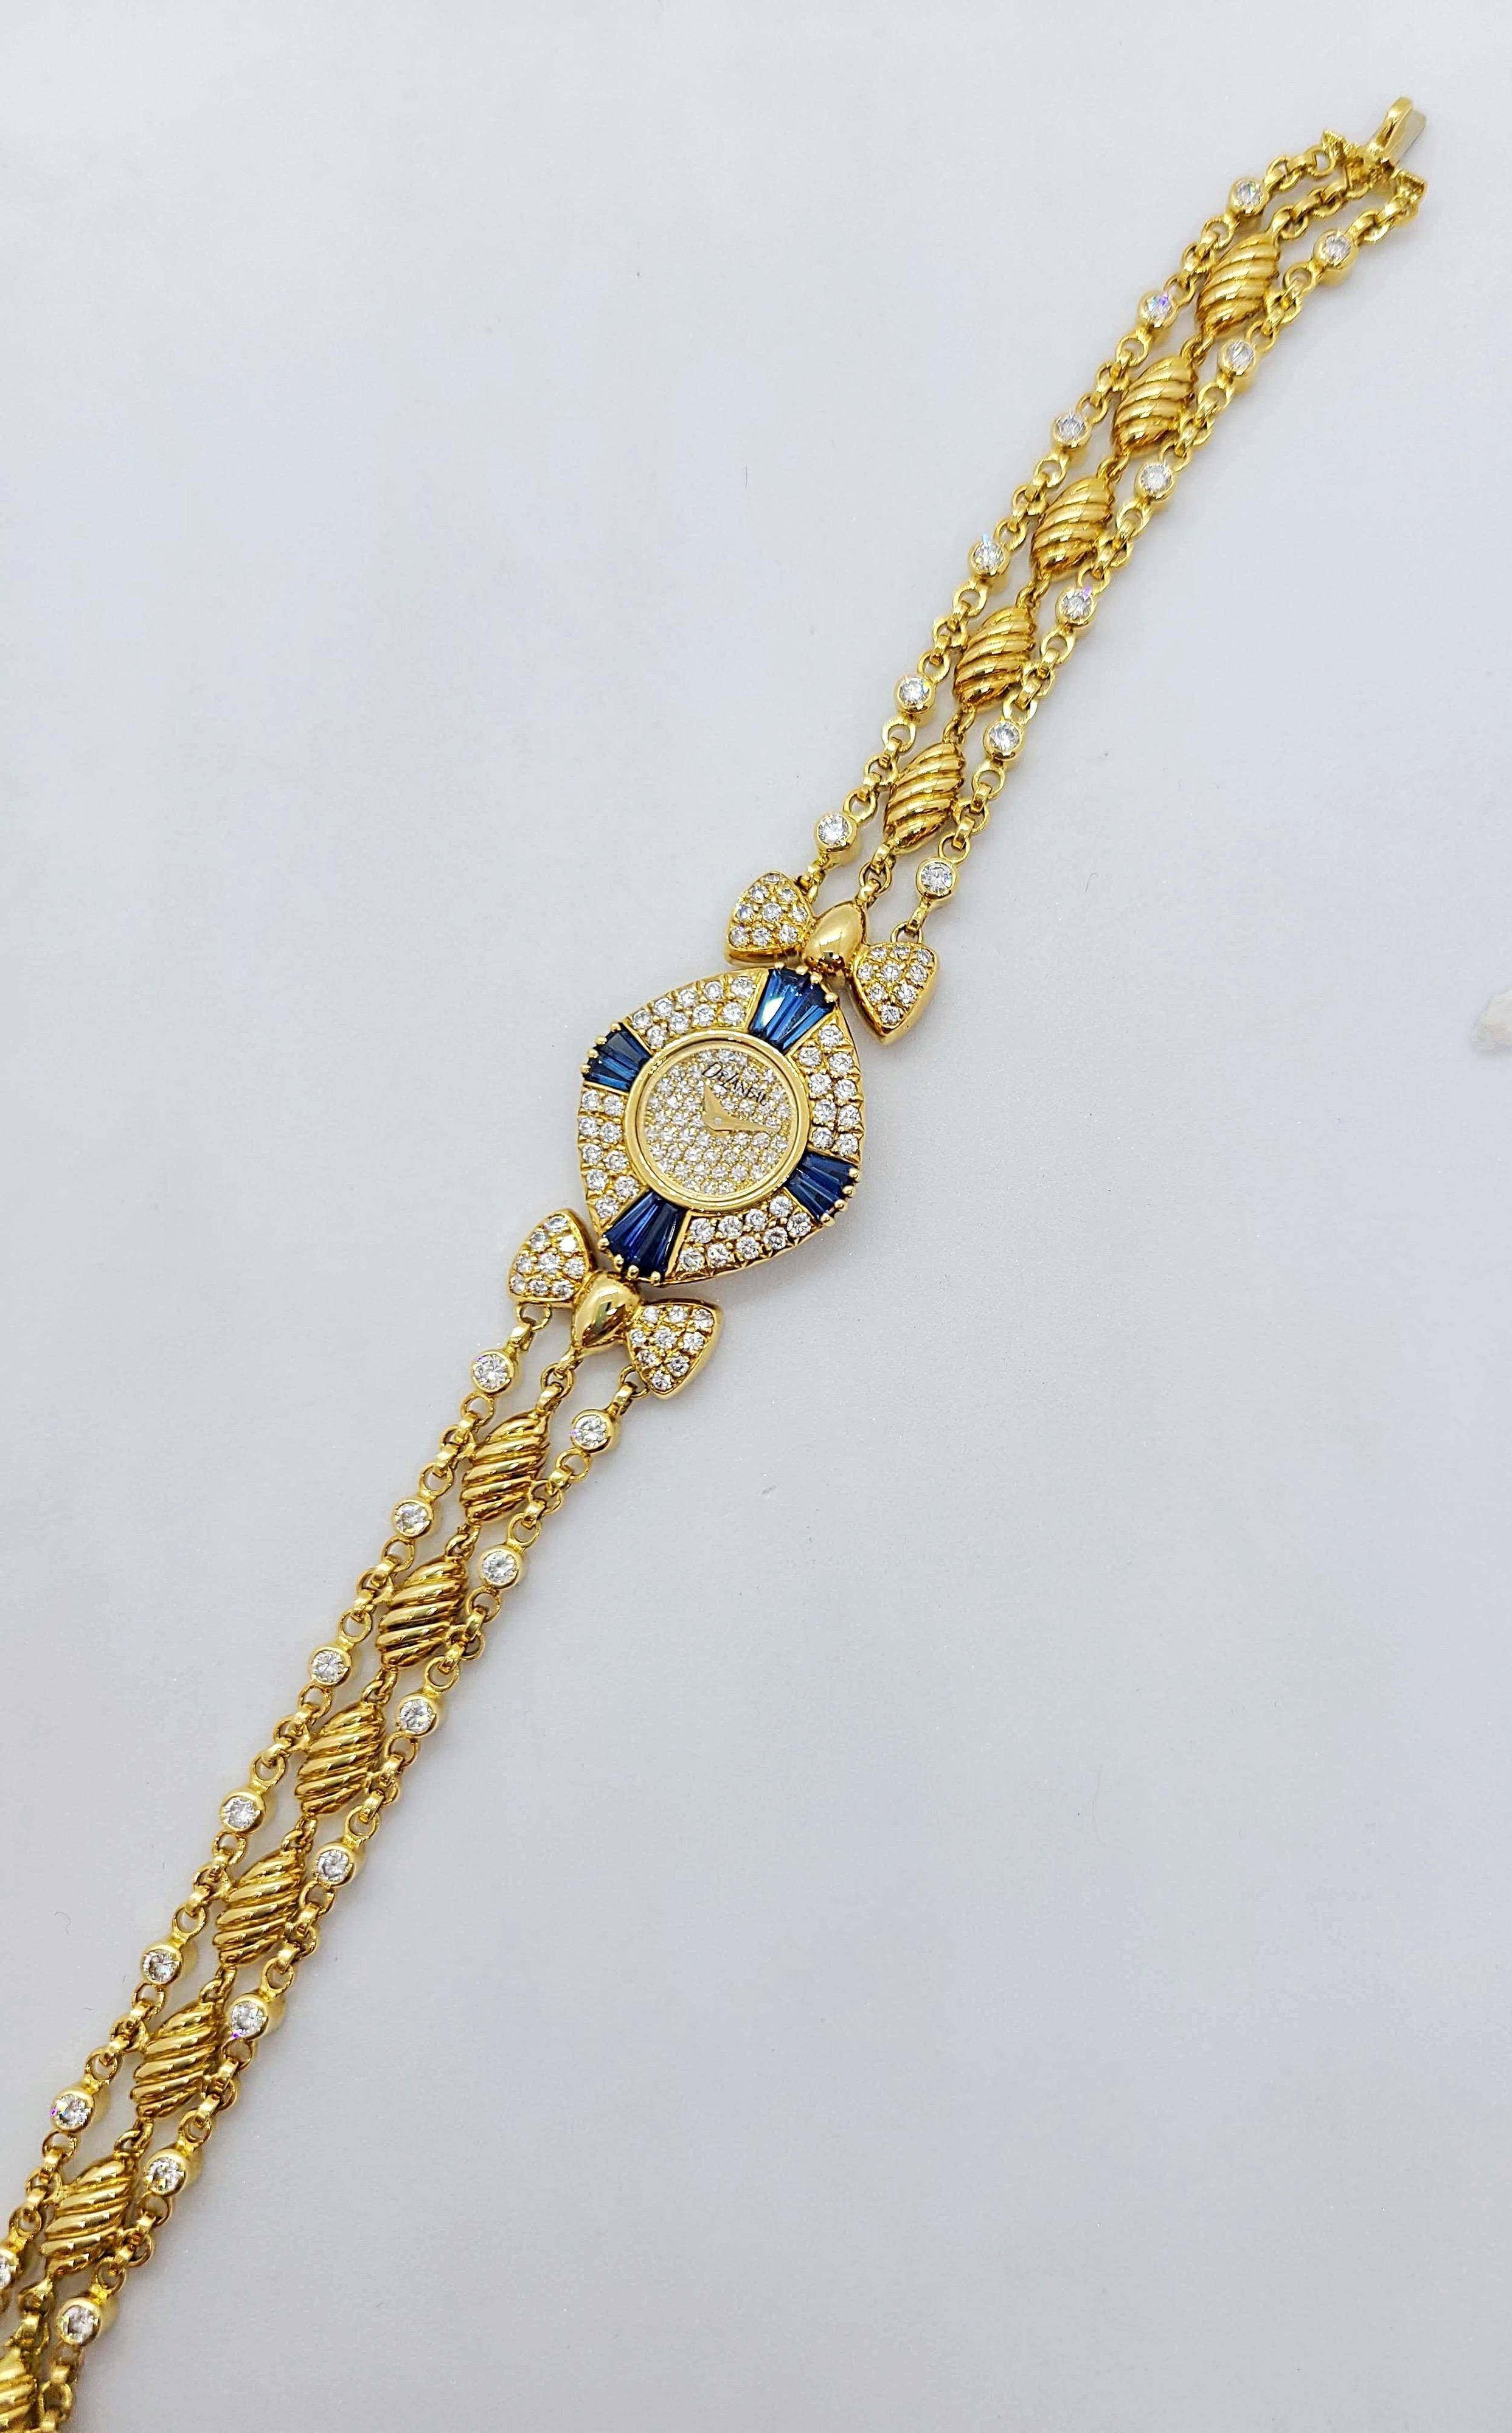 DeLaneau was founded by a woman in 1949 in Switzerland.  They are one of the first watch companies to devote their entire collection to ladies timepieces.
The face of this 18 karat yellow gold cushion shaped watch is set with pave diamonds. The